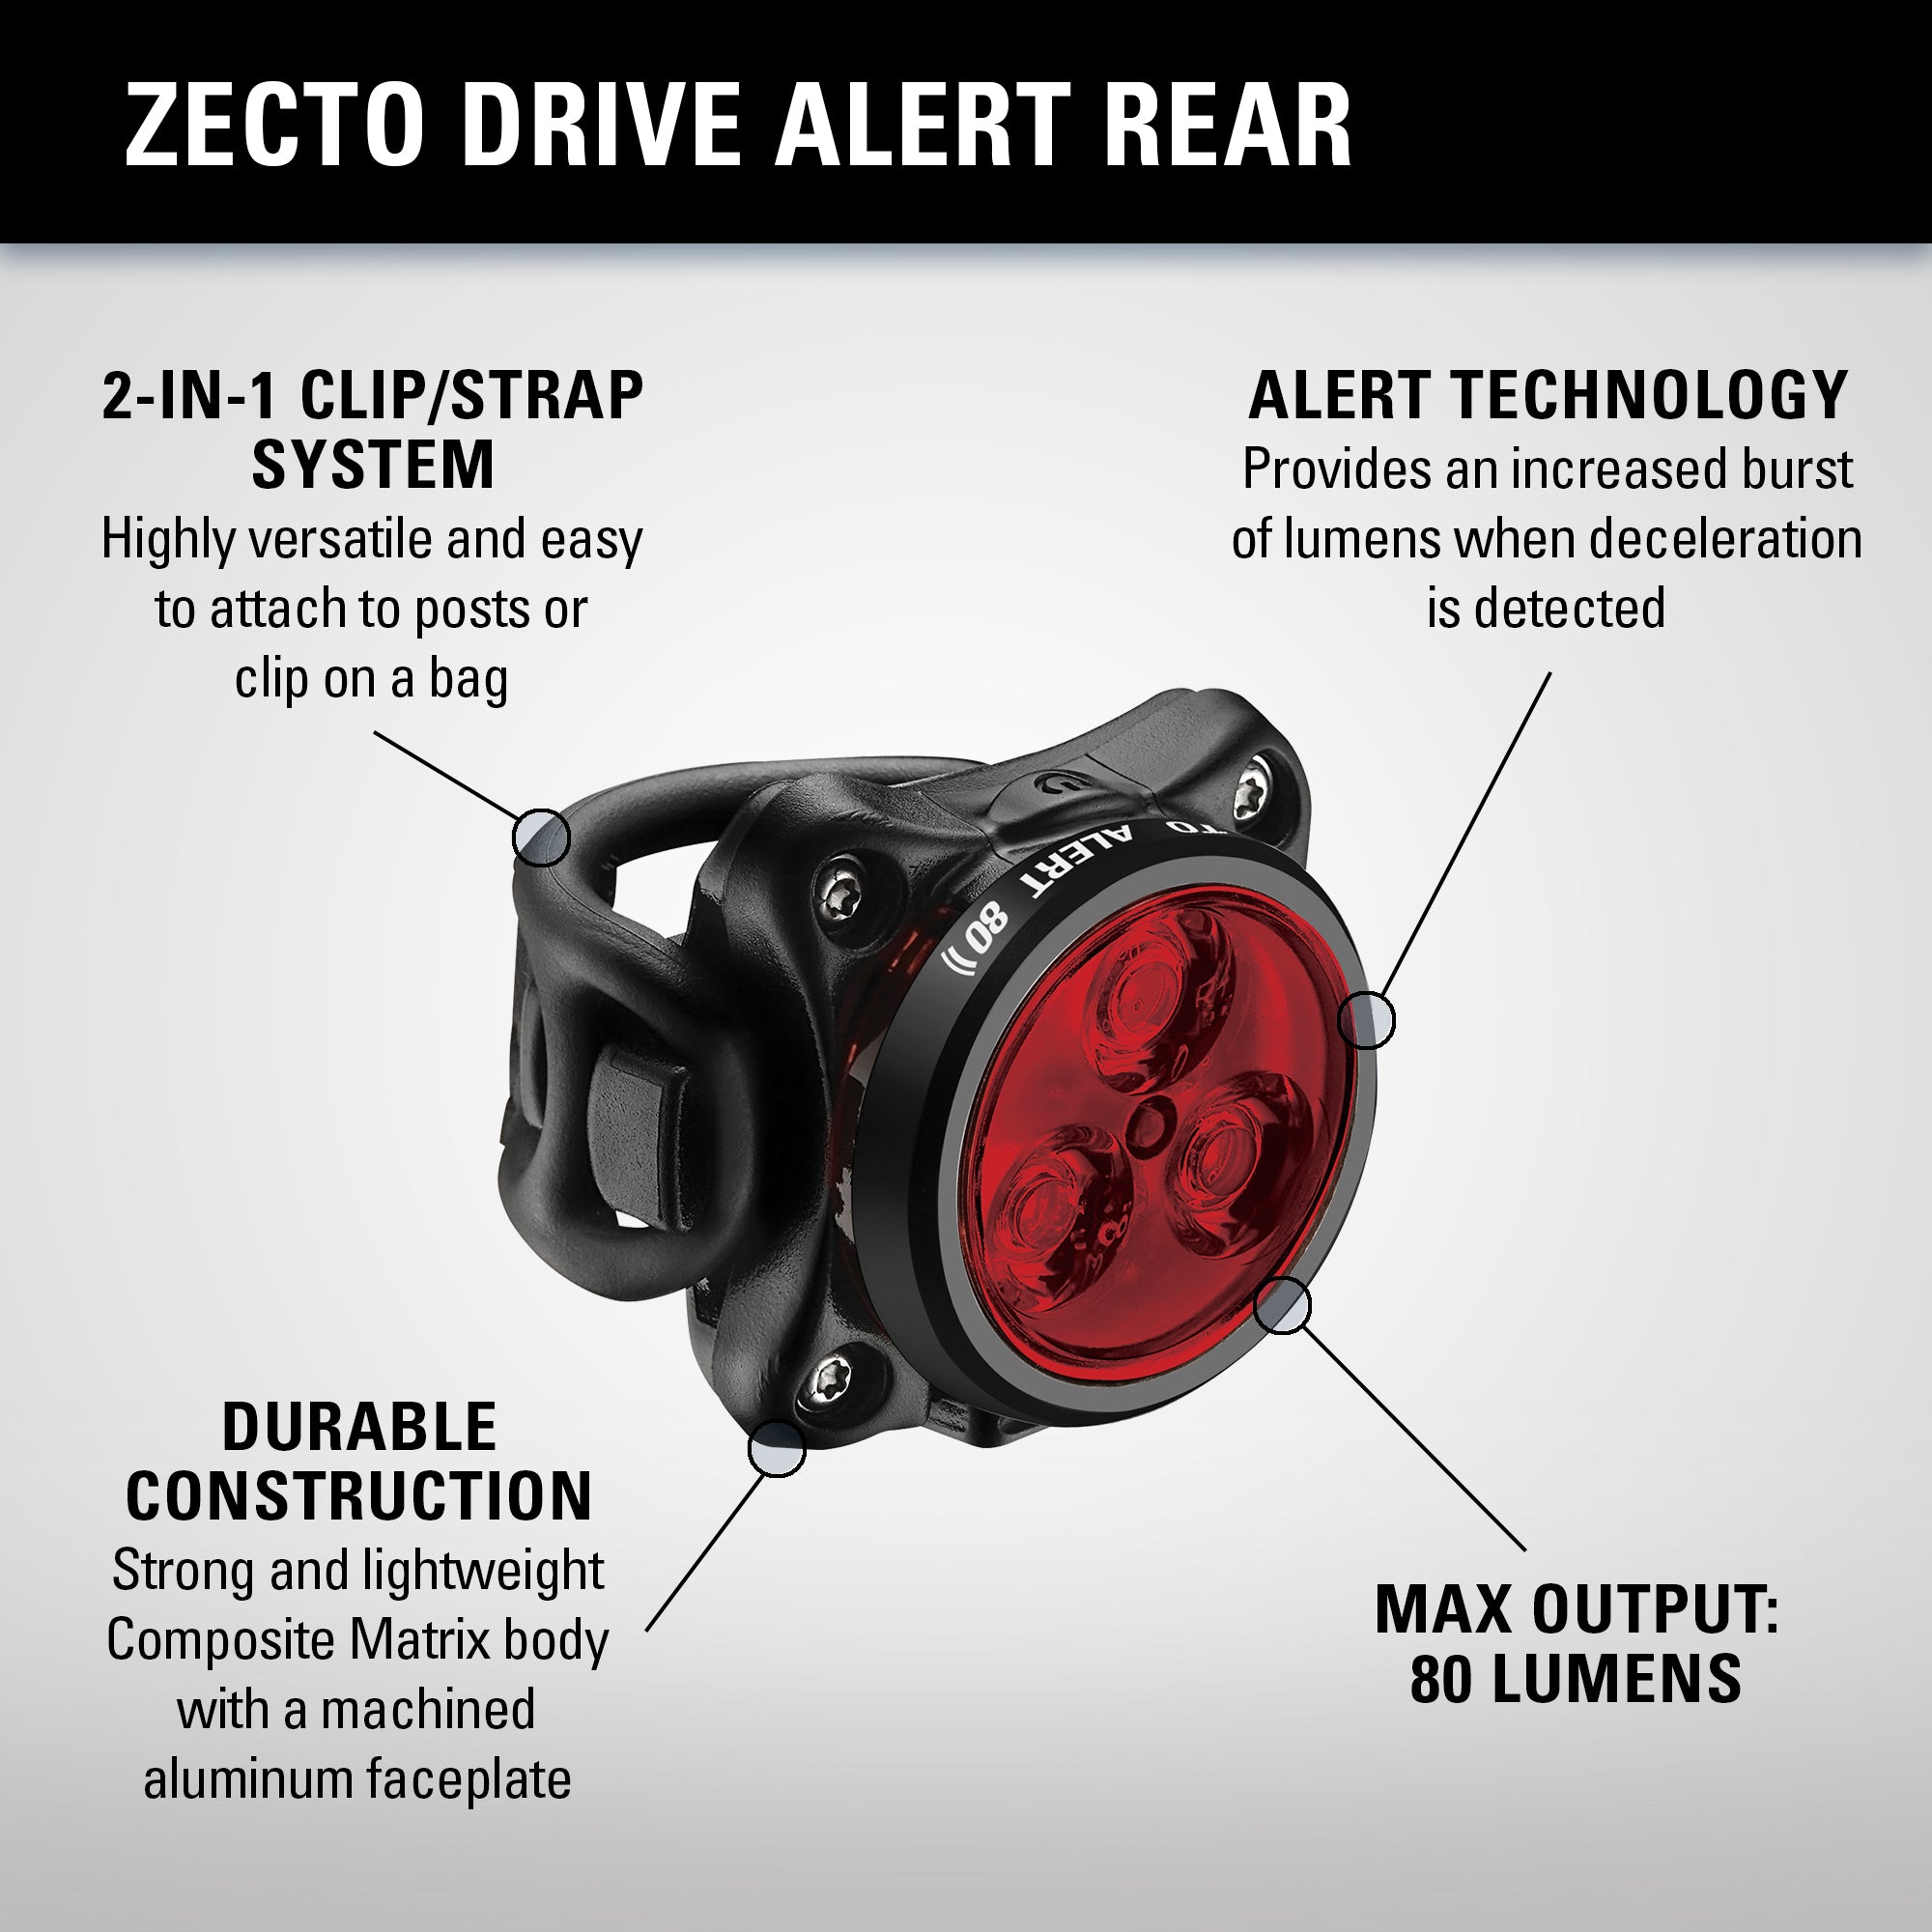 INFOGRAPHIC FOR ZECTO DRIVE ALERT REAR BIKE LIGHT. 2-IN-1 CLIP/STRAP SYSTEM (HIGHLY CVERSATILE AND EASY TO ATTACH TO POSTS OR CLIP ON A BAG). ALERT TECHNOLOGY (PROVIDES AN INCREASED BURST OF LUMENS WHEN DECELERATION IS DETECTED). DURABLE CONSTRUCTION (STRONG AND LIGHTWEIGHT COMPOSITE MATRIX BODY WITH A MACHINED ALUMINUM FACEPLATE). MAX OUTPUT: 80 LUMENS. 